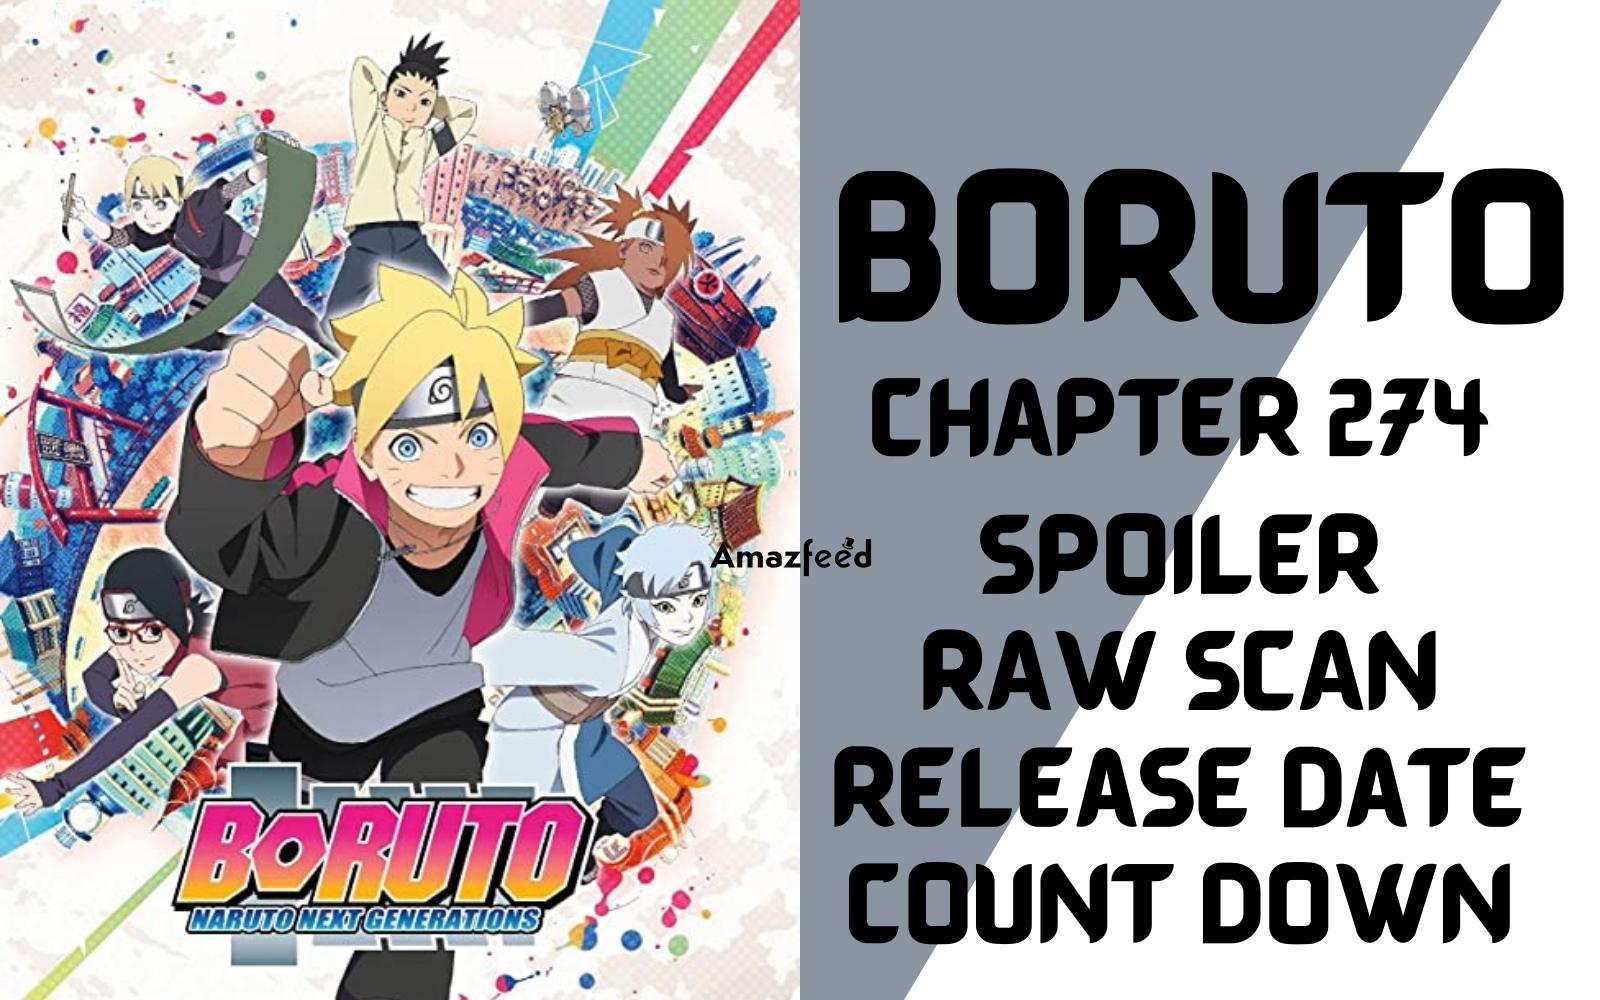 Boruto Episode 274 Spoiler, Release Date and Time, Countdown, Where to Watch, and More